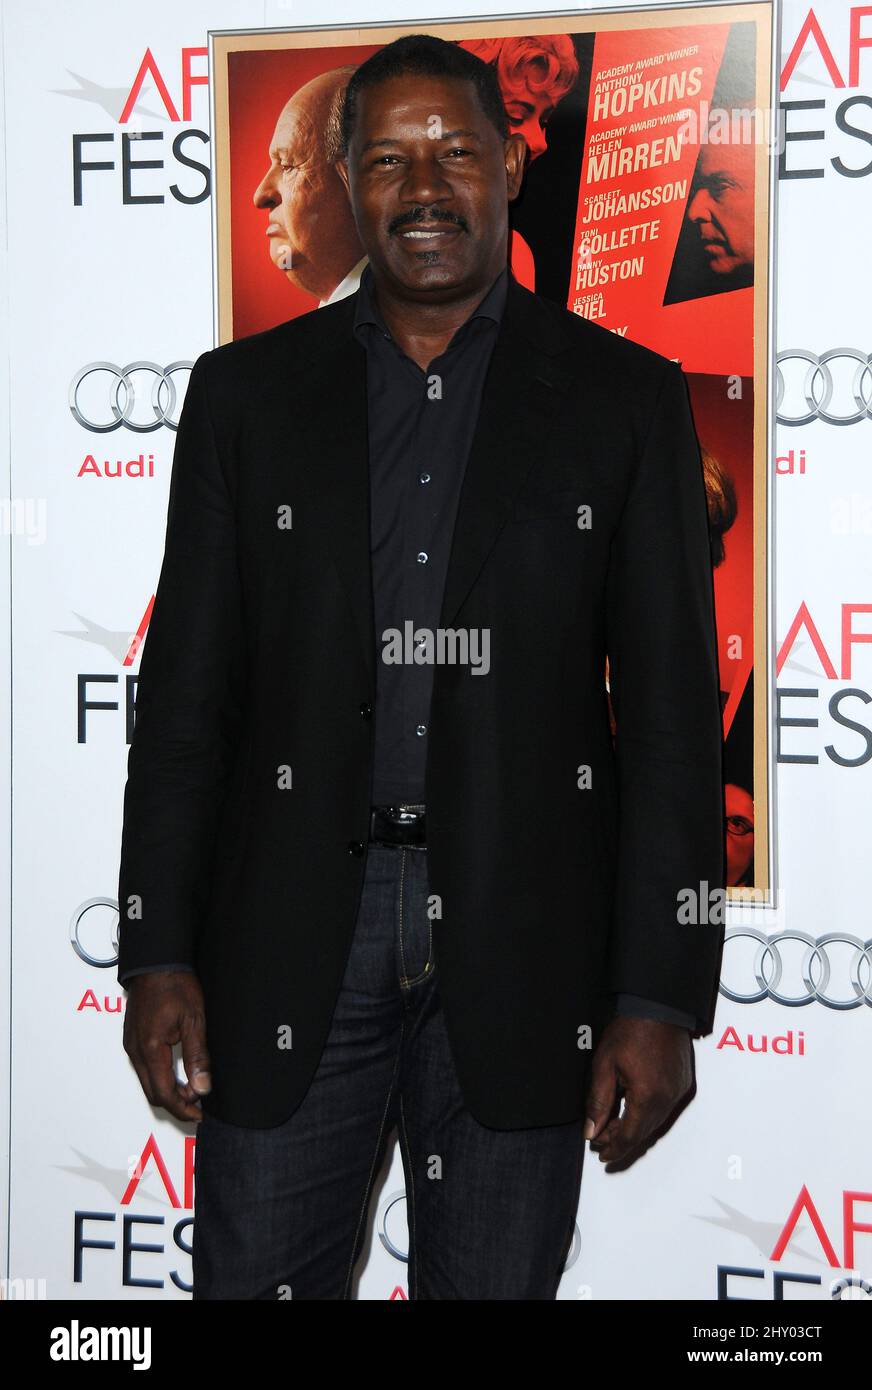 Dennis Haysbert attending the world premiere of "Hitchcock", at Grauman's Chinese Theatre in Hollywood, California. Stock Photo